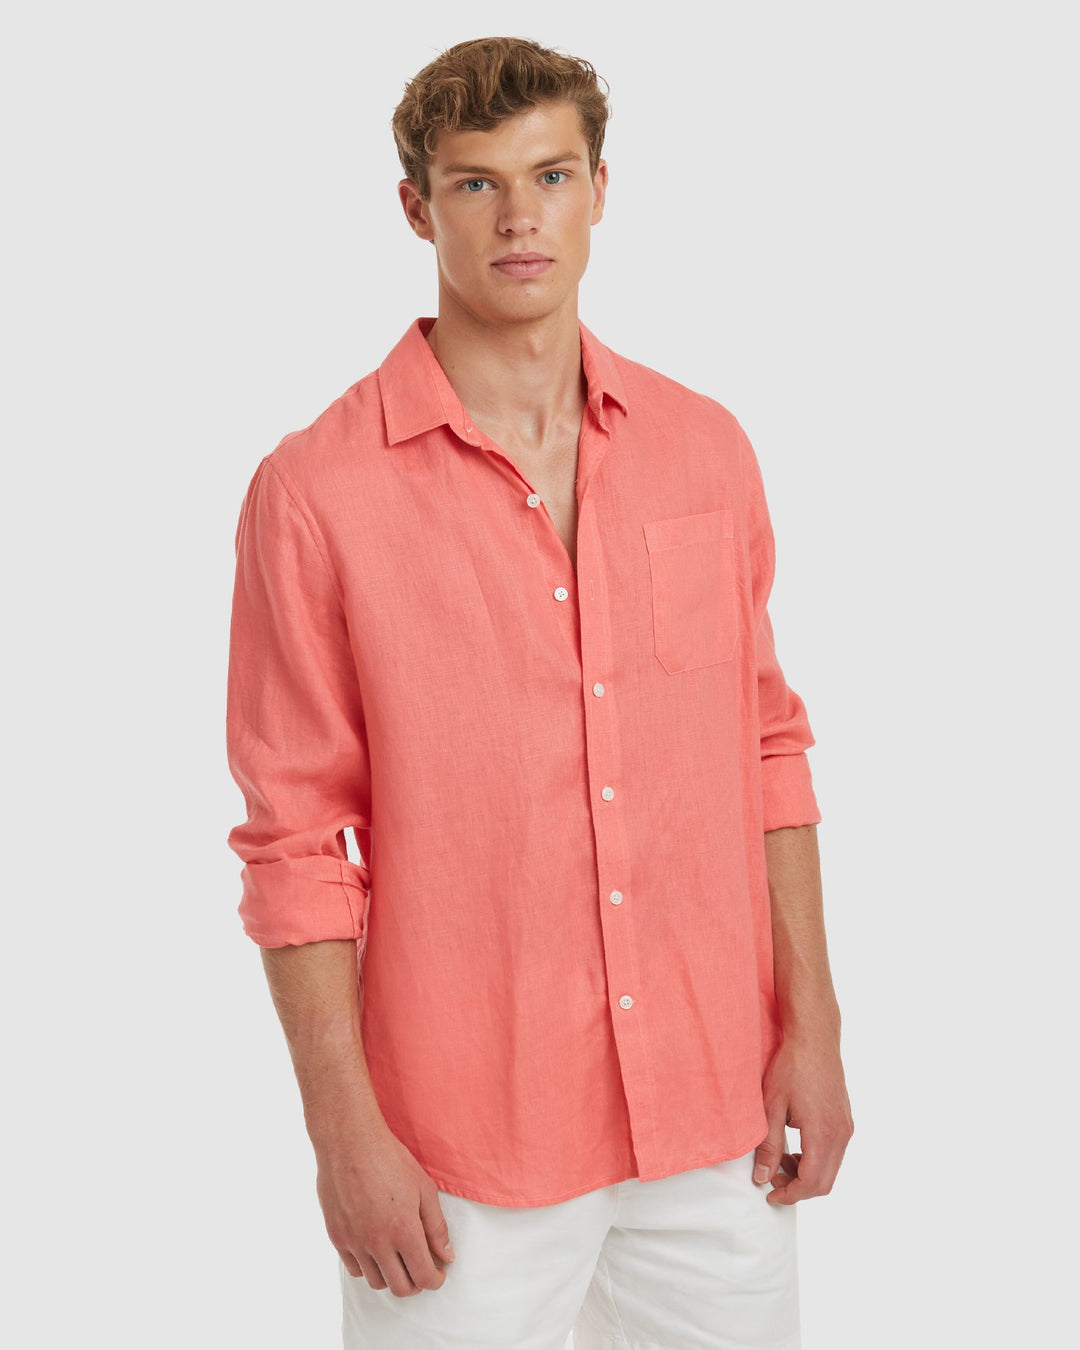 Men's Loose Linen Shirt︱ - In the Middle Tulum